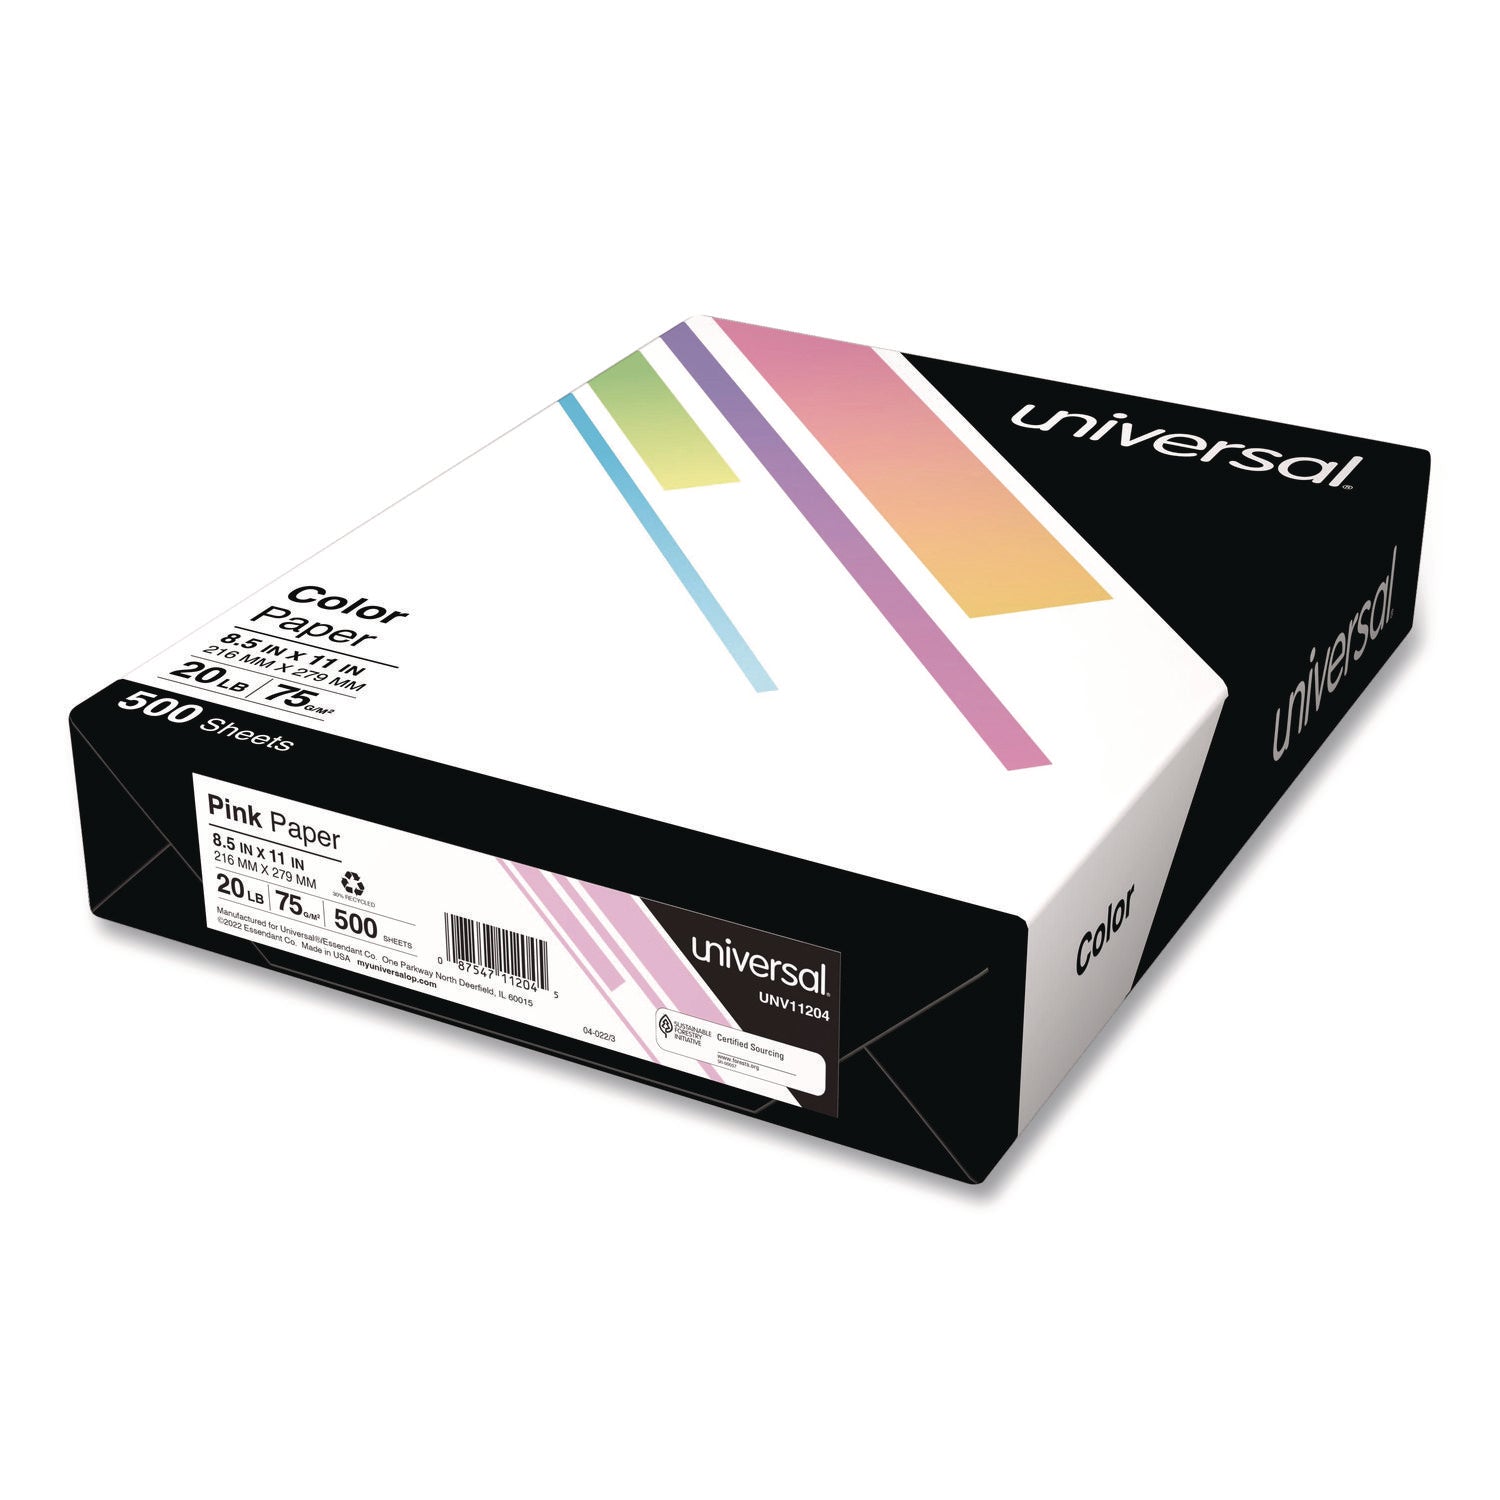 Deluxe Colored Paper, 20 lb Bond Weight, 8.5 x 11, Pink, 500/Ream - 3